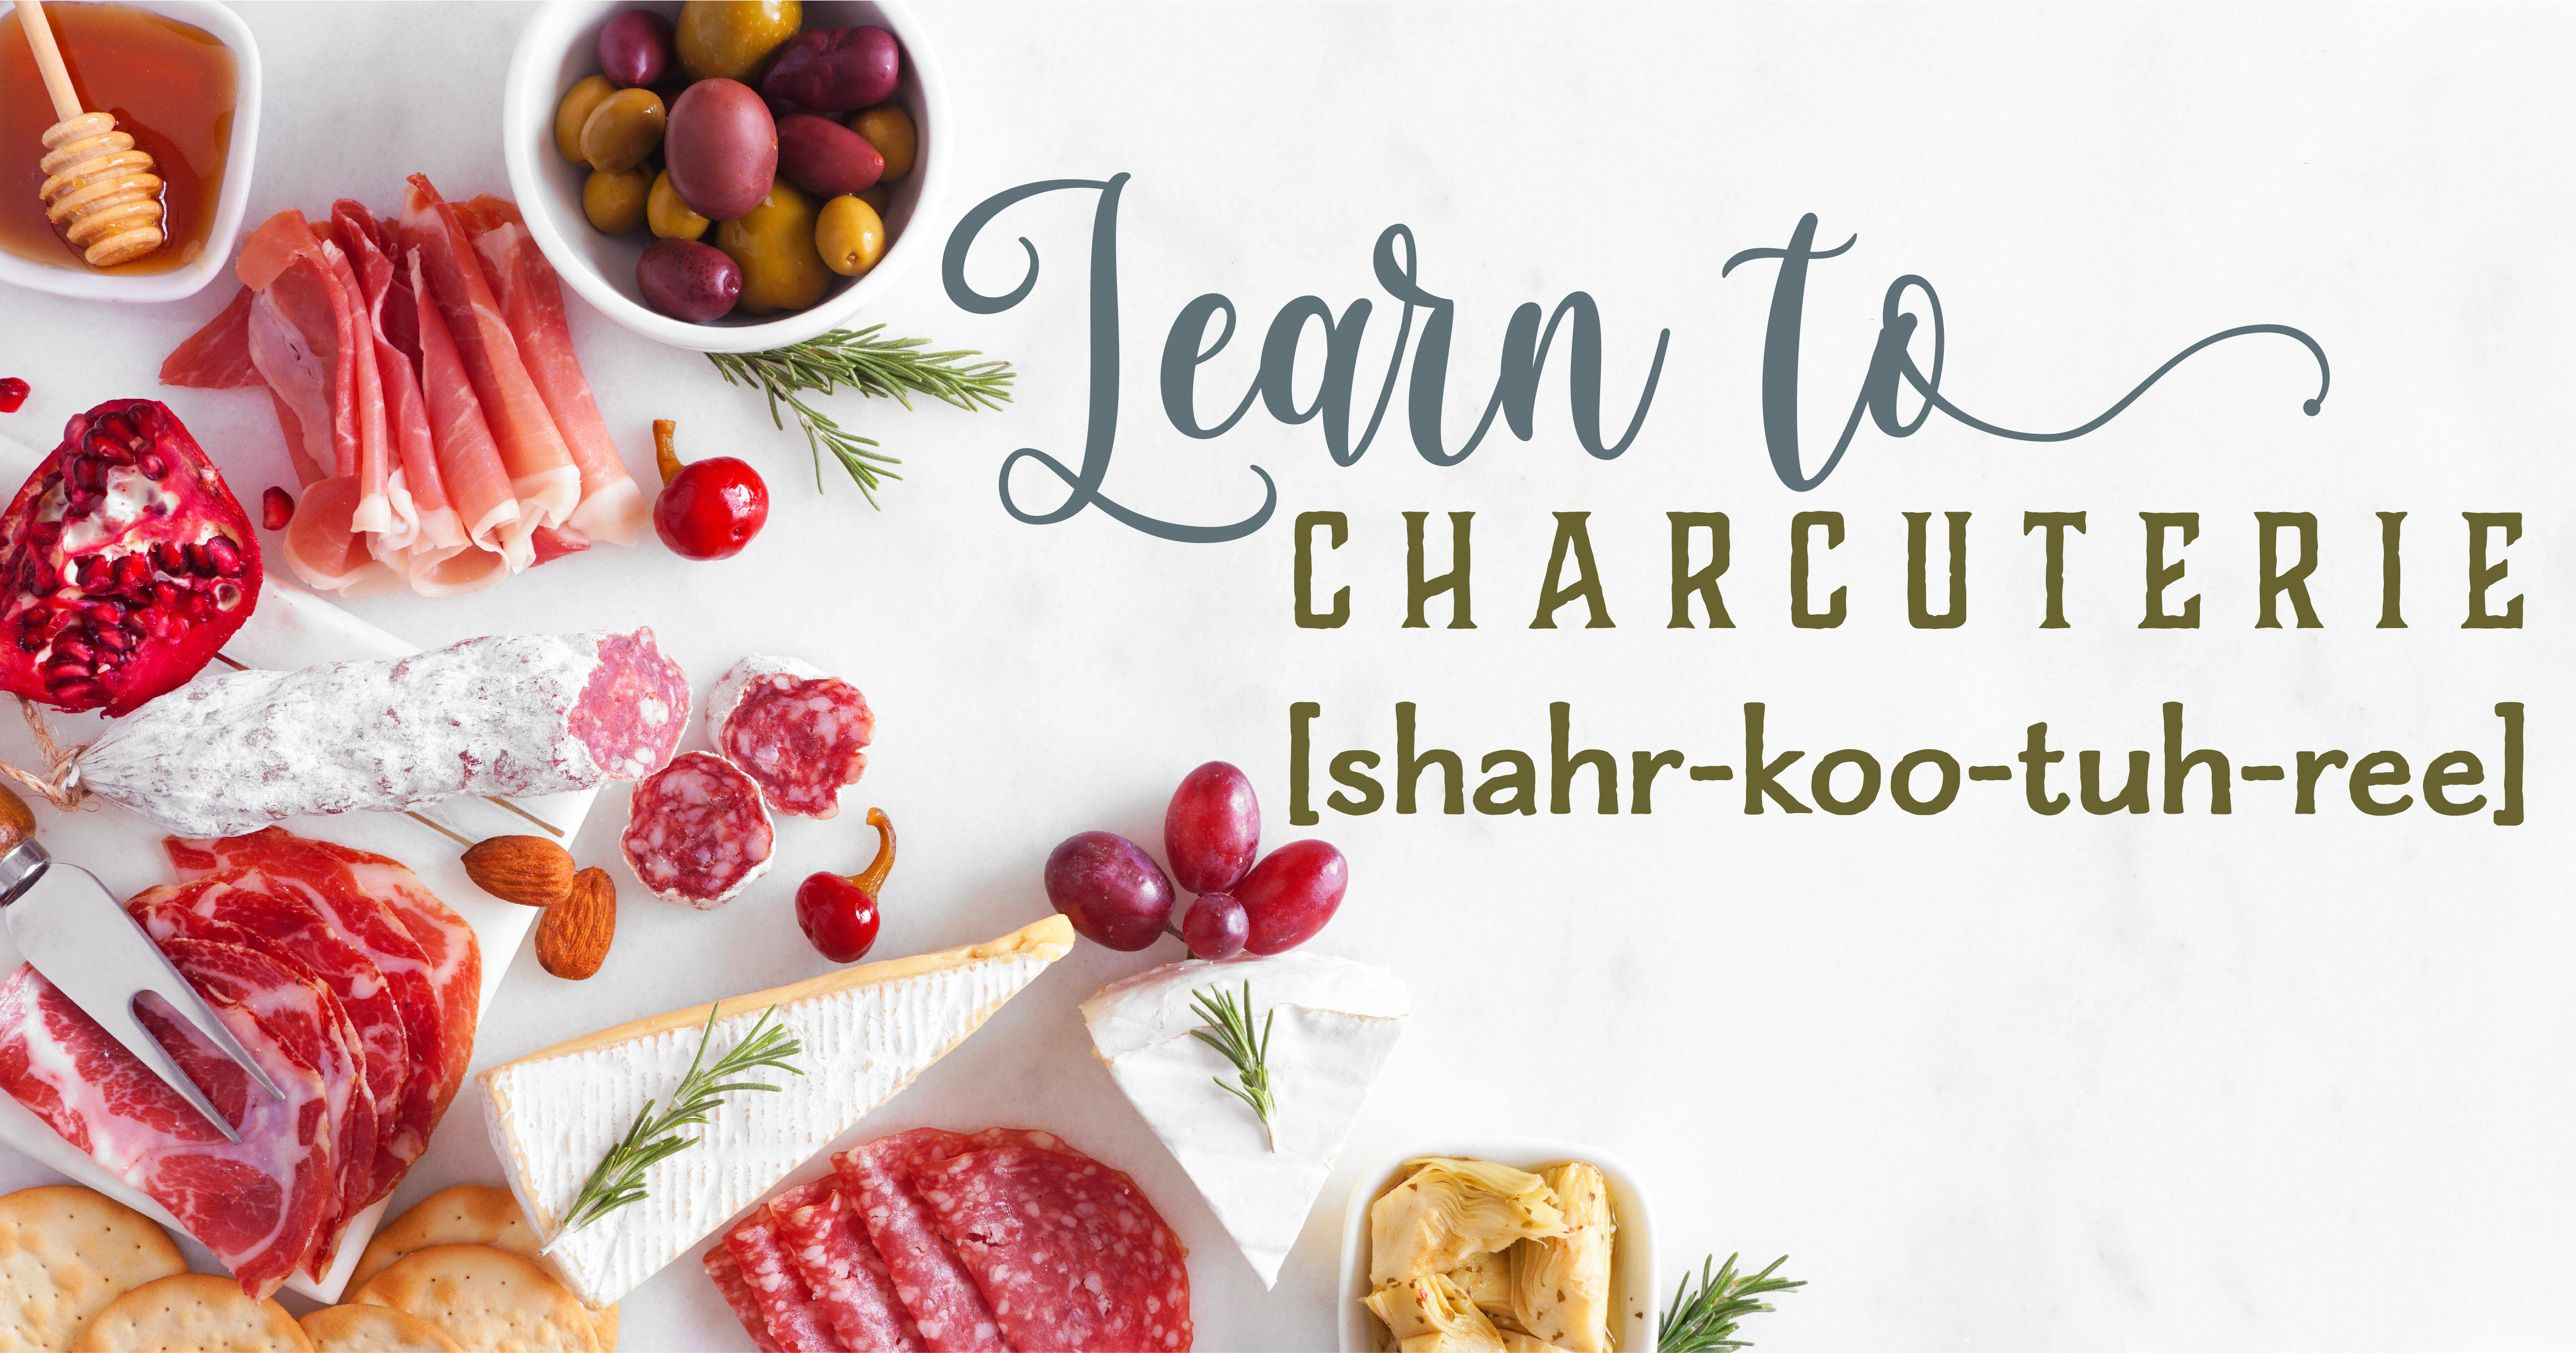 Learn to Charcuterie